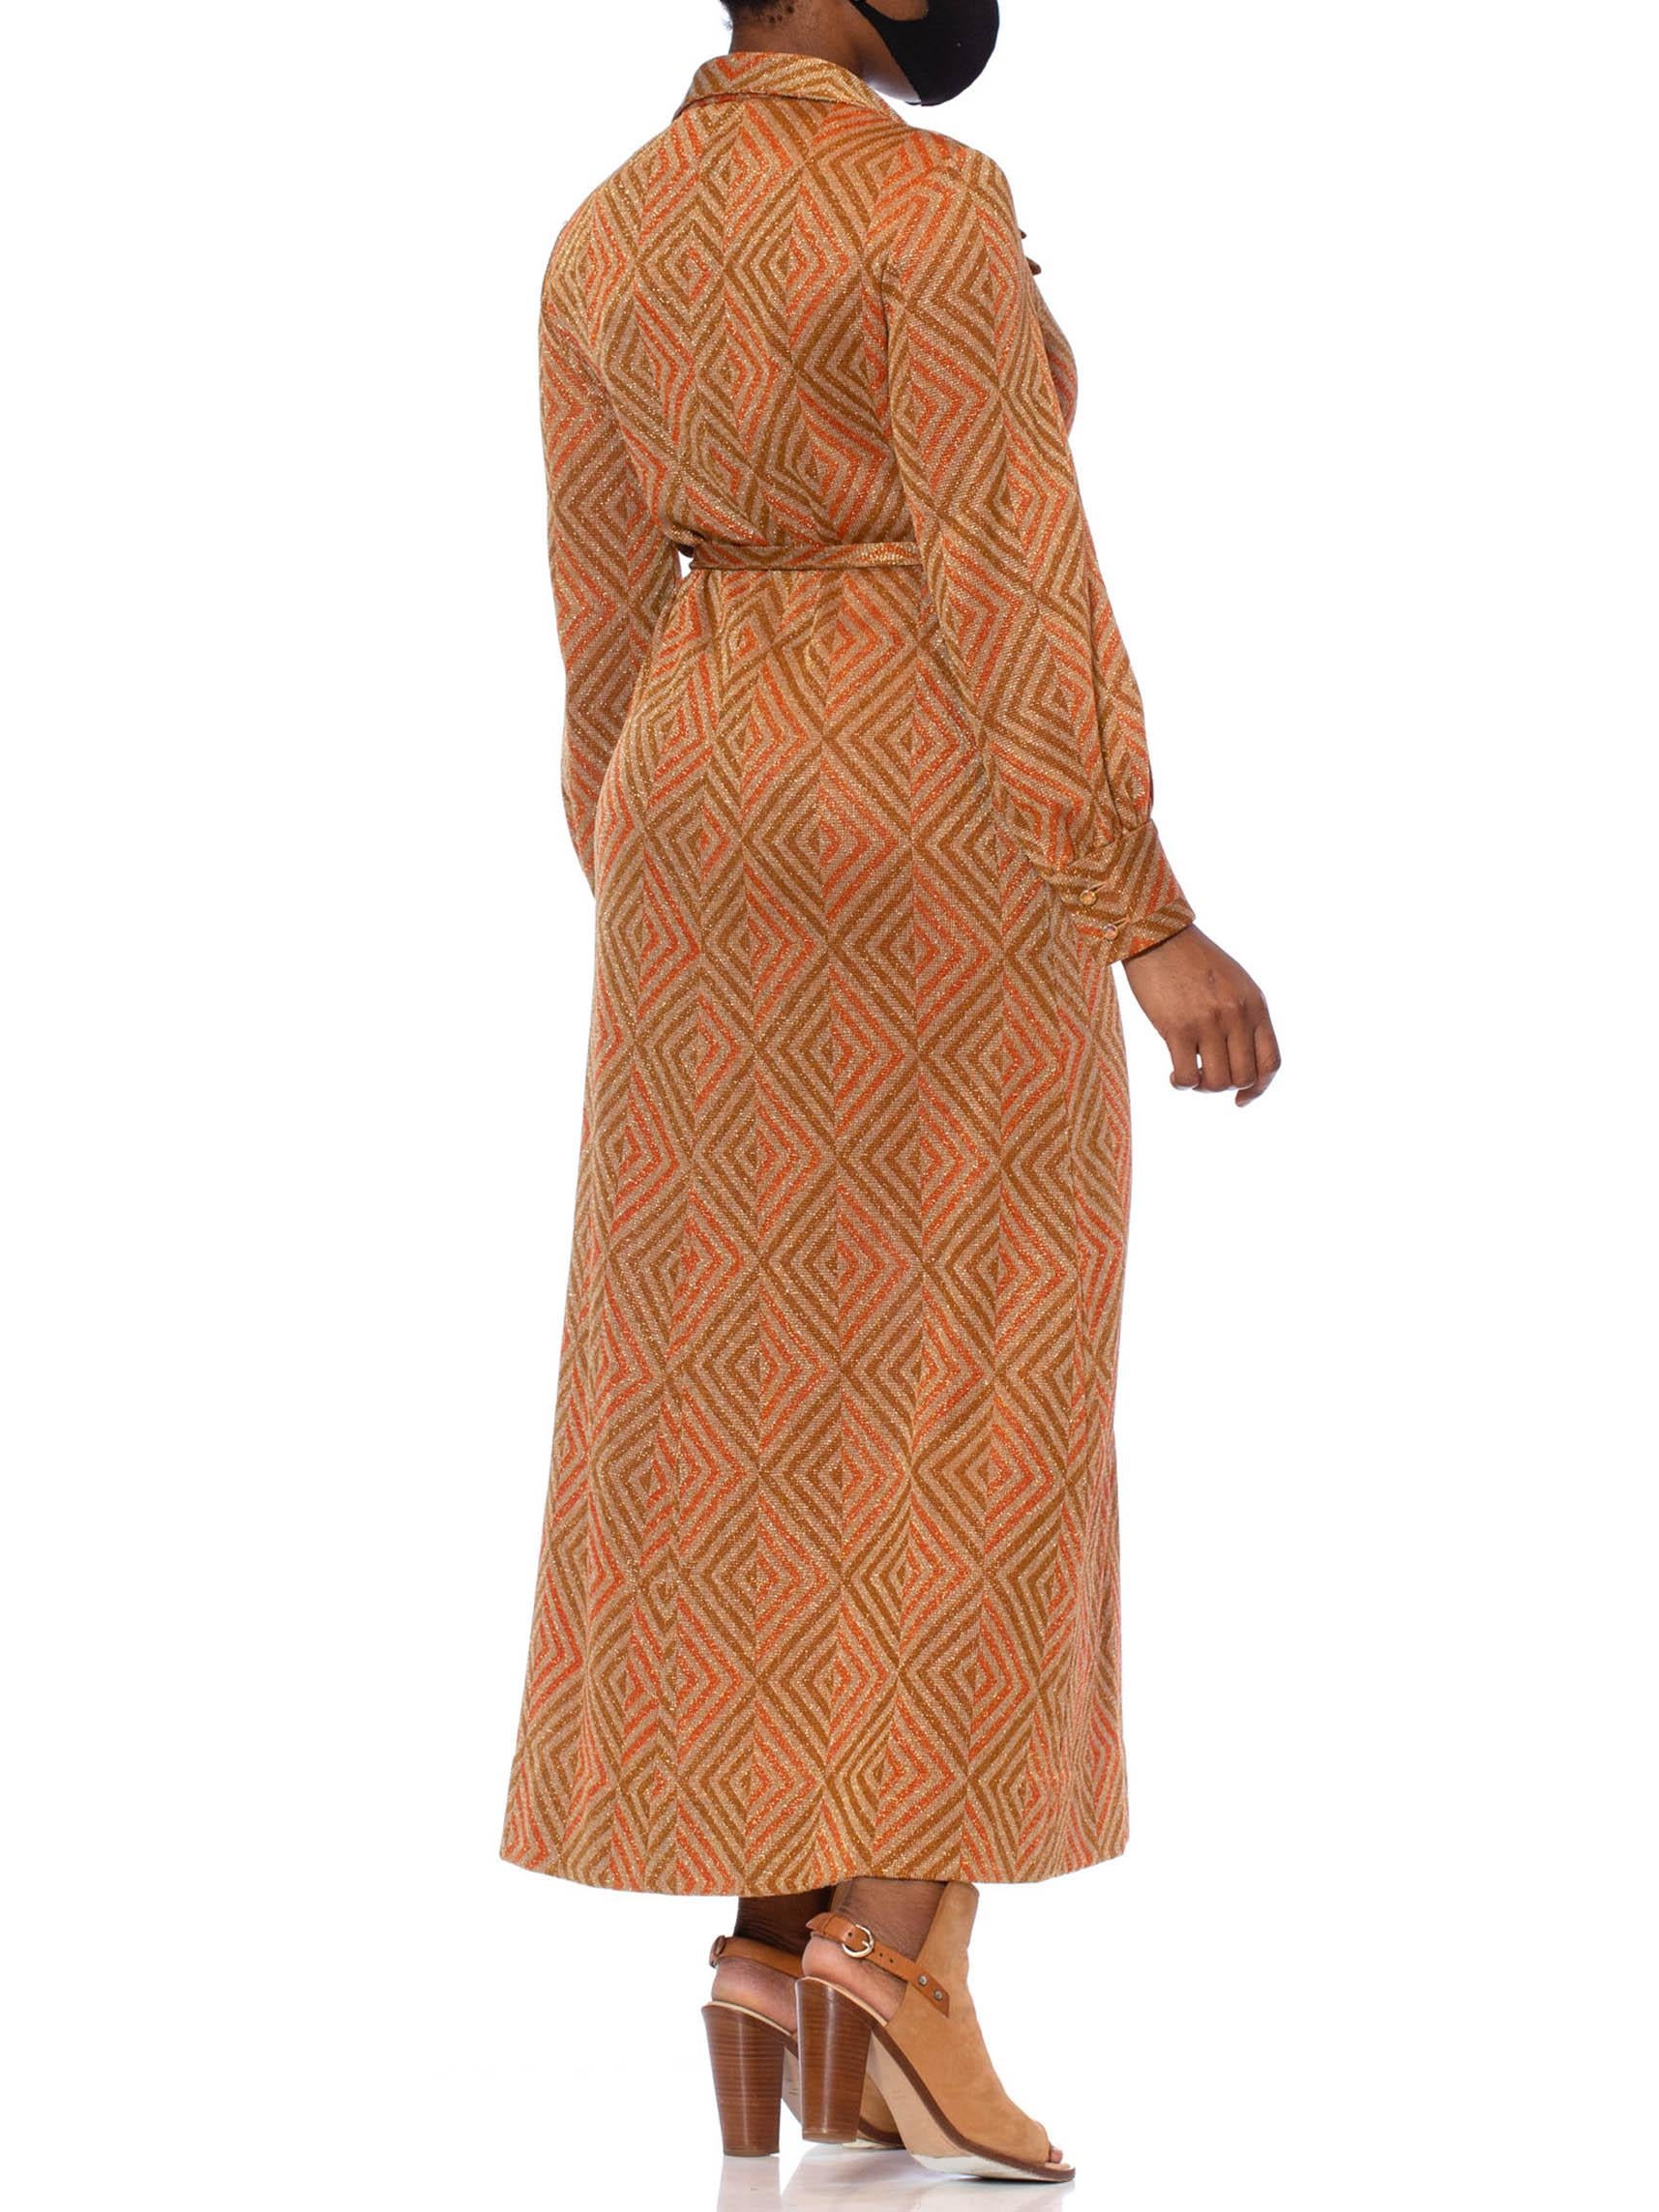 1970S Cinnamon Brown & Orange Poly/Lurex Double Knit Long Sleeved Maxi Cocktail 2